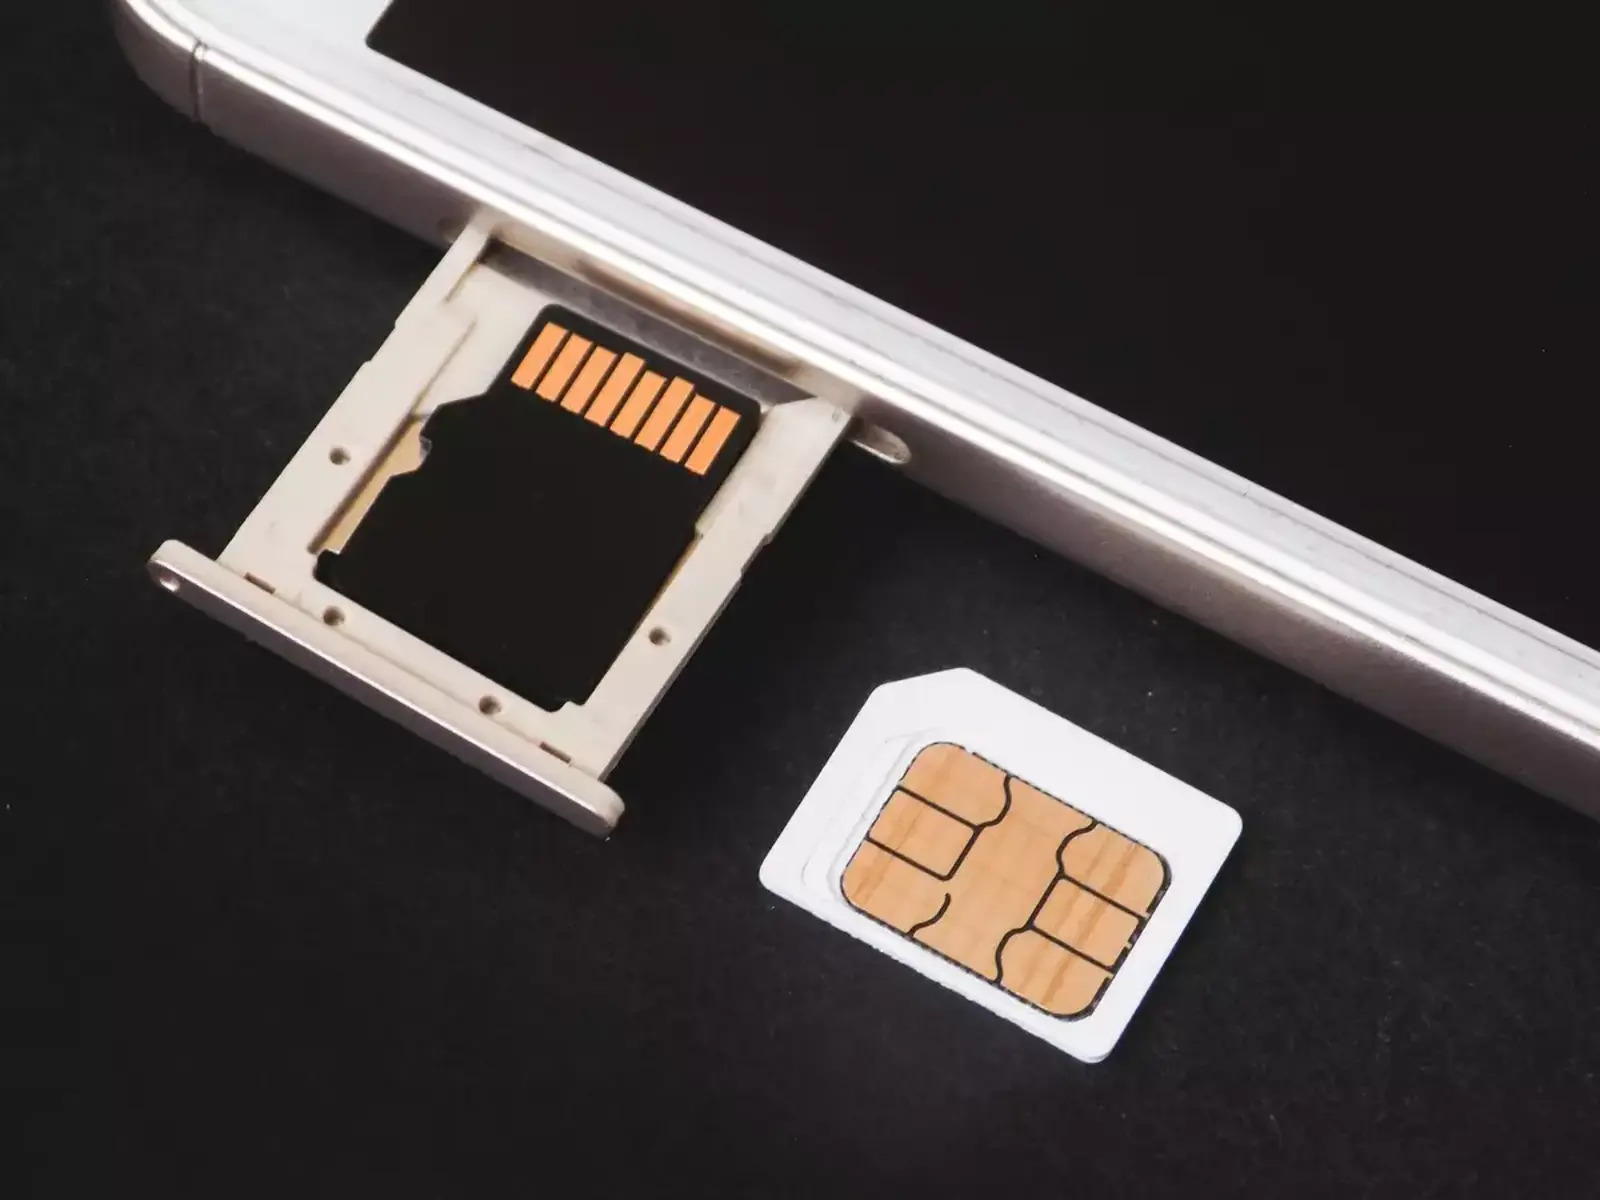 transfer-data-from-sim-card-to-phone-memory-step-by-step-guide